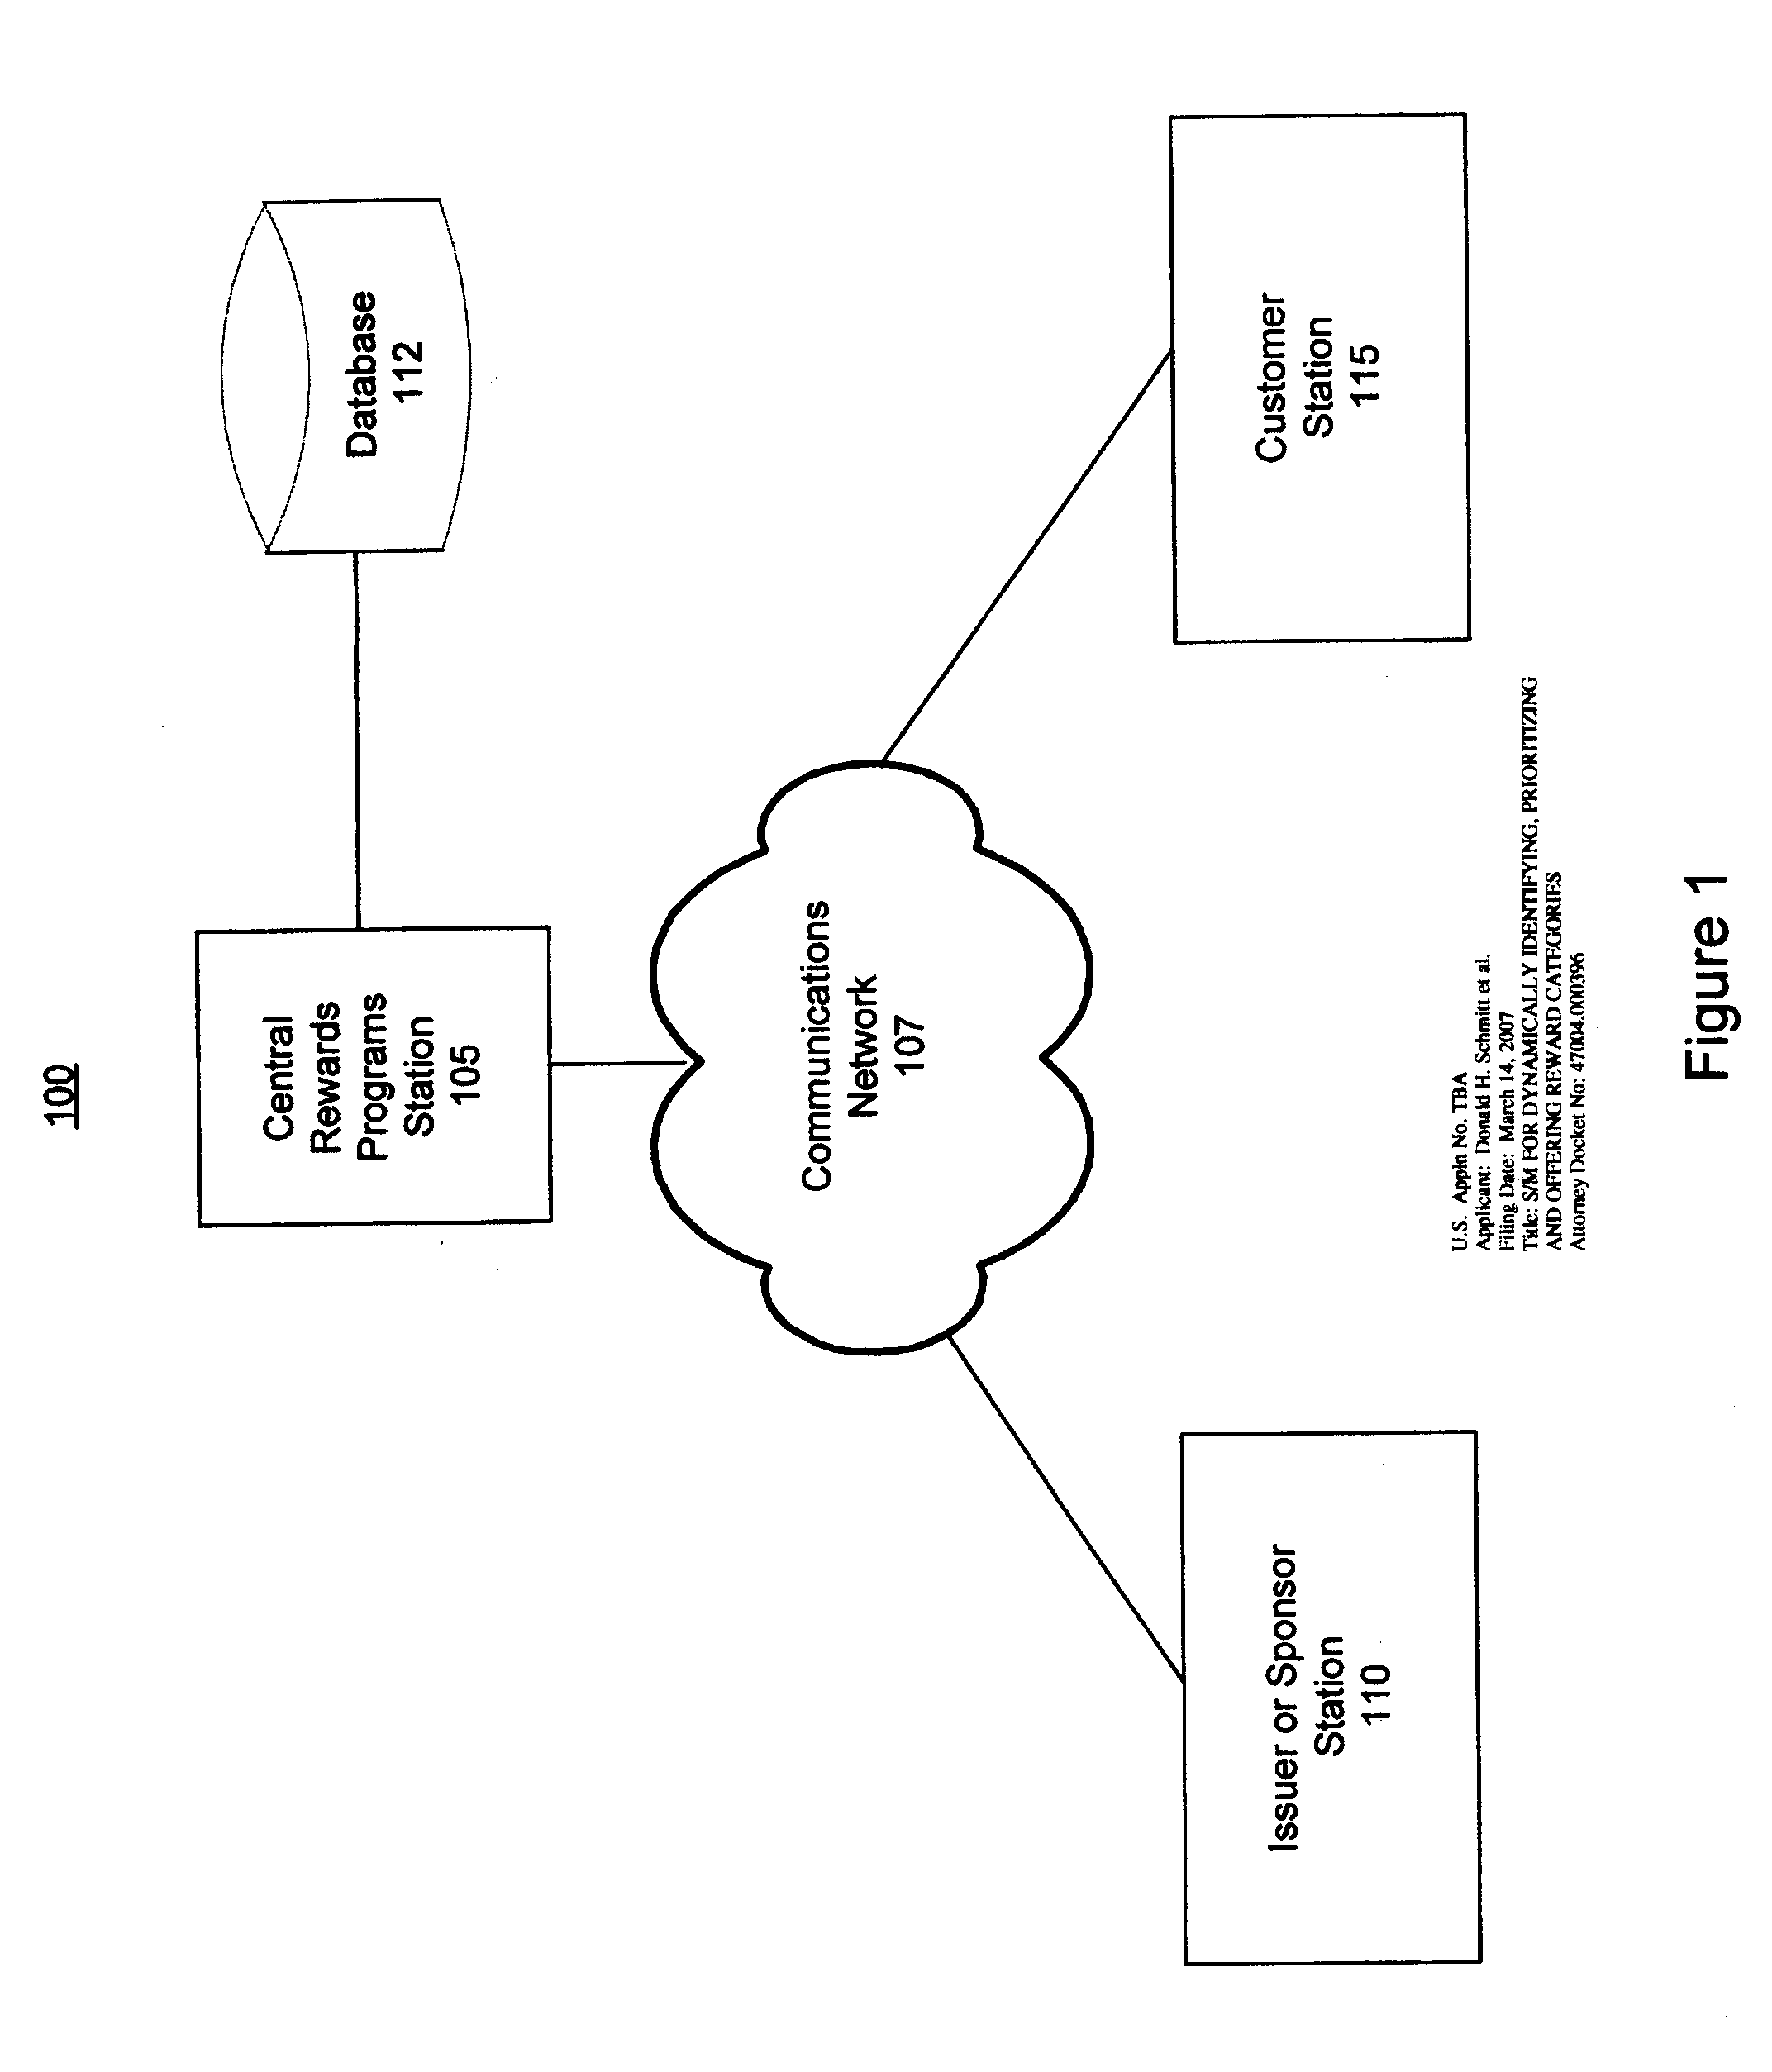 System and Method for Dynamically Identifying, Prioritizing and Offering Reward Categories